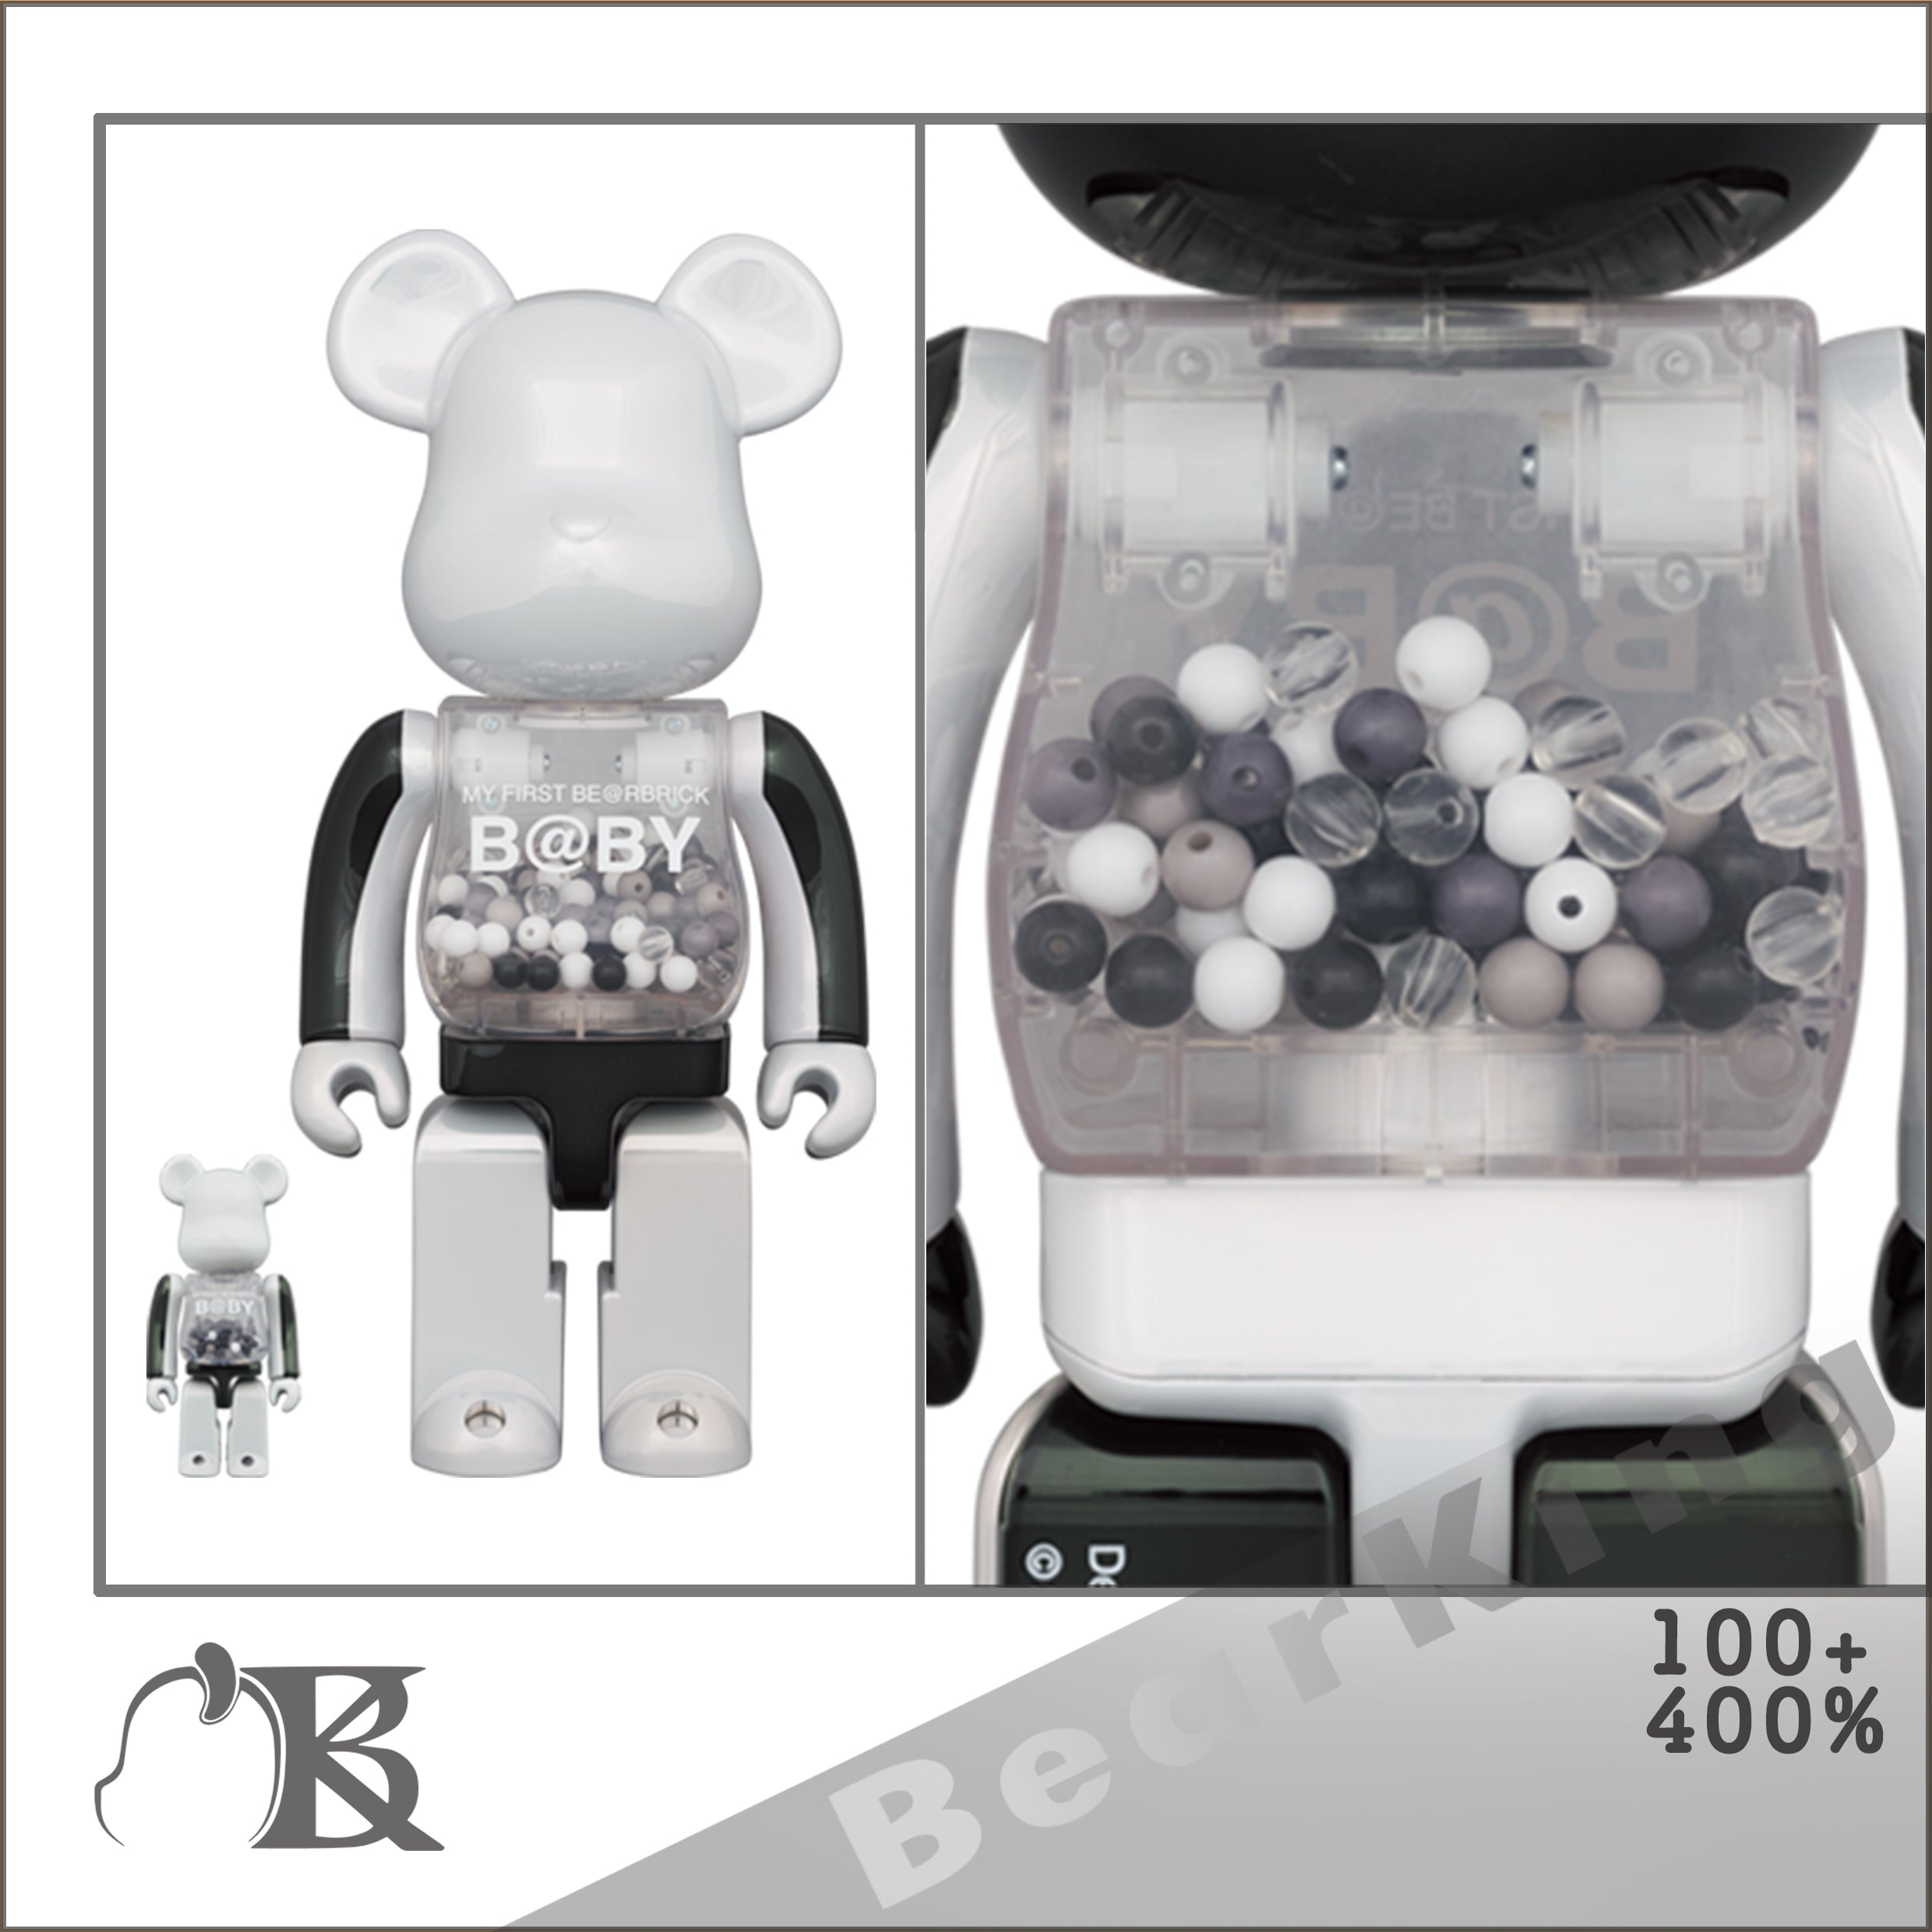 MY FIRST BE@RBRICK B@BY innersect100 400